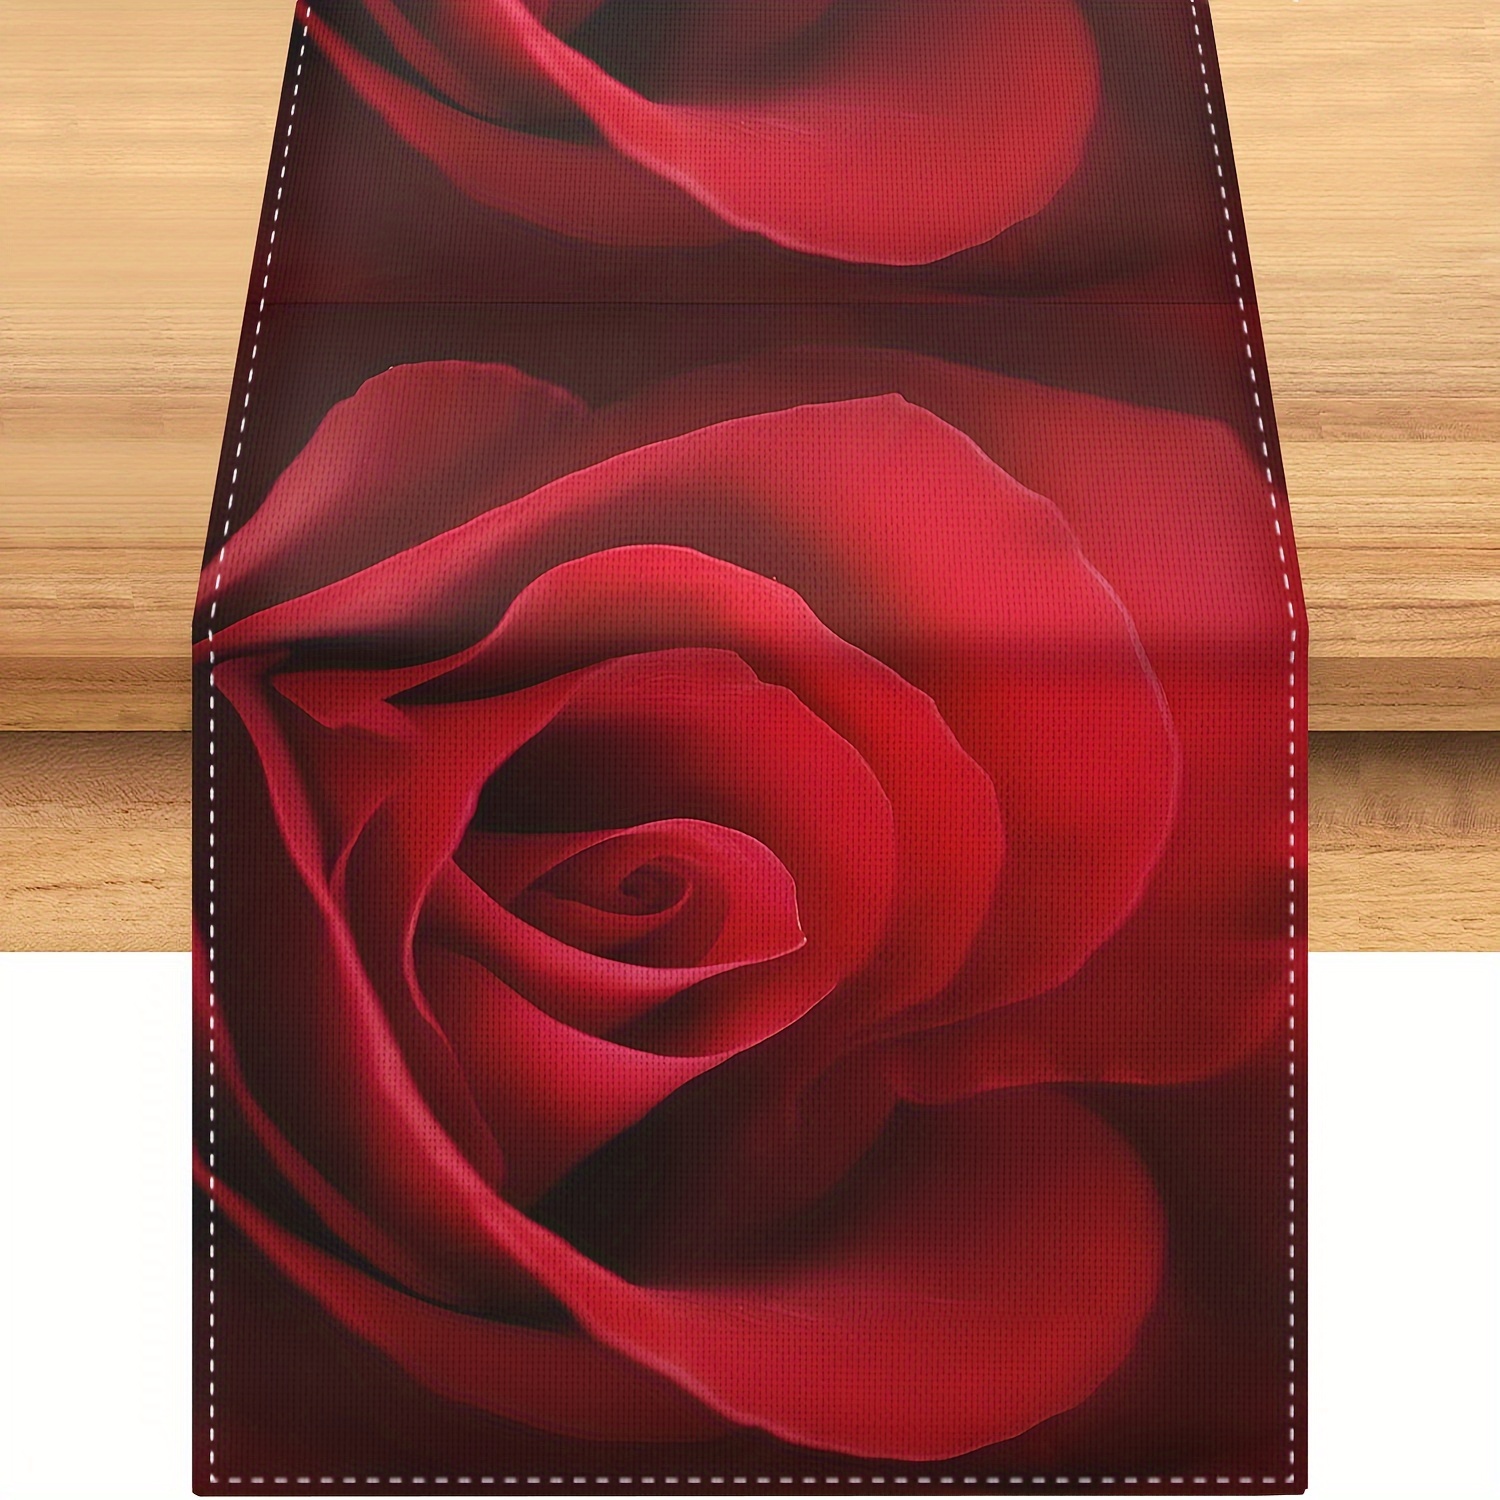 

1pc, Table Runner, Romantic Roses Pattern Table Runner, Non-slip Rectangle Covered With Delicate Red Roses Printed Pattern For Dining Room, Kitchen, Living Room, Dining Table Decor